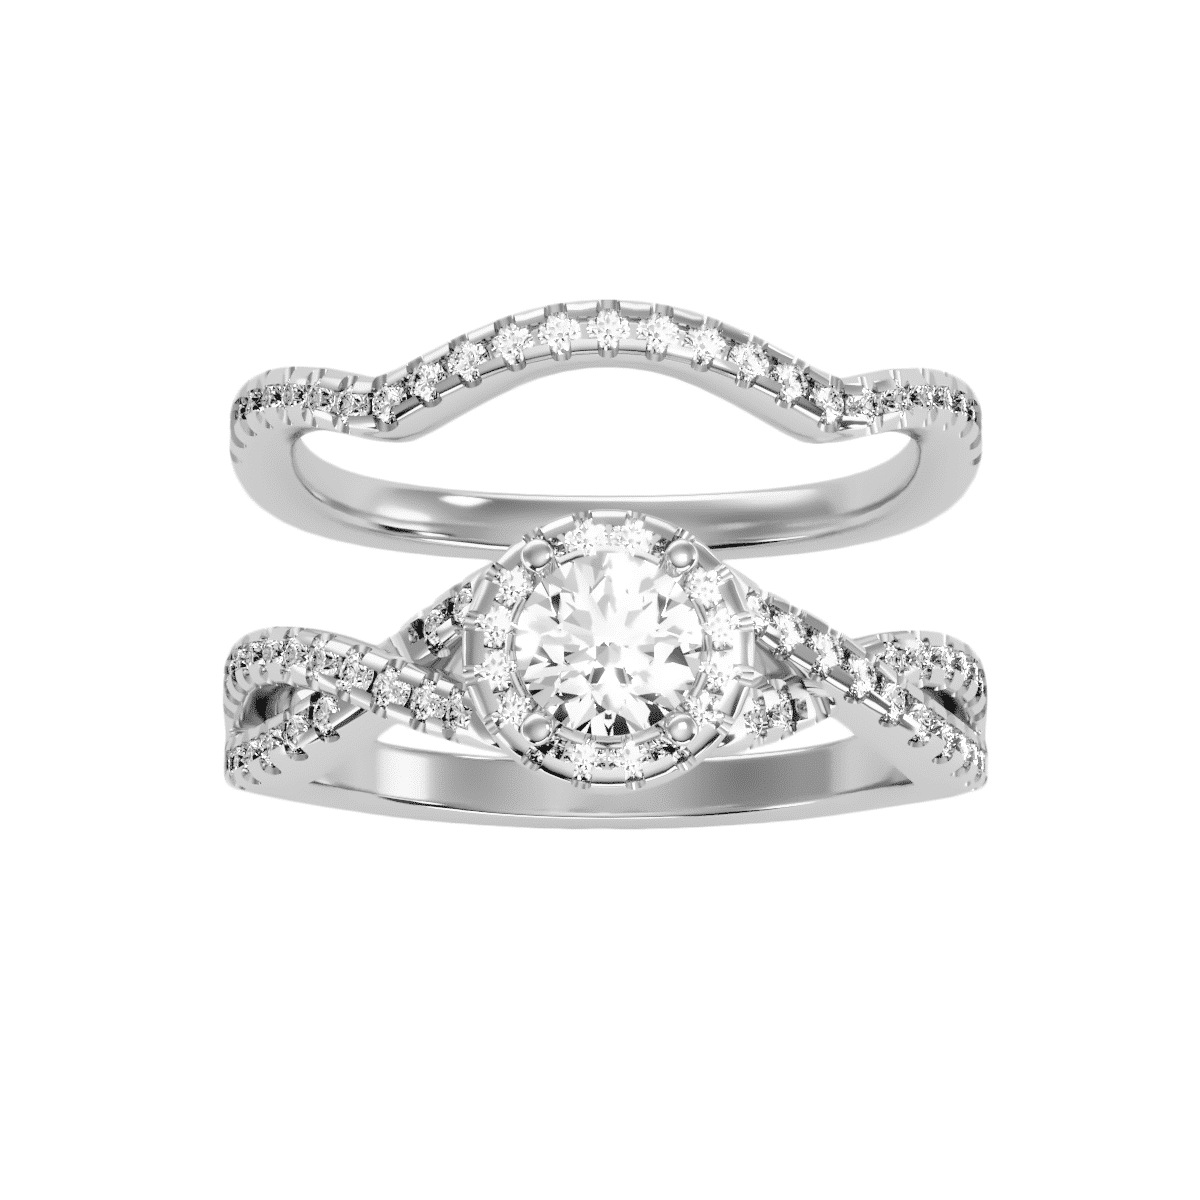 Round Cut Halo Cross-Shank With Matching Wedding Band